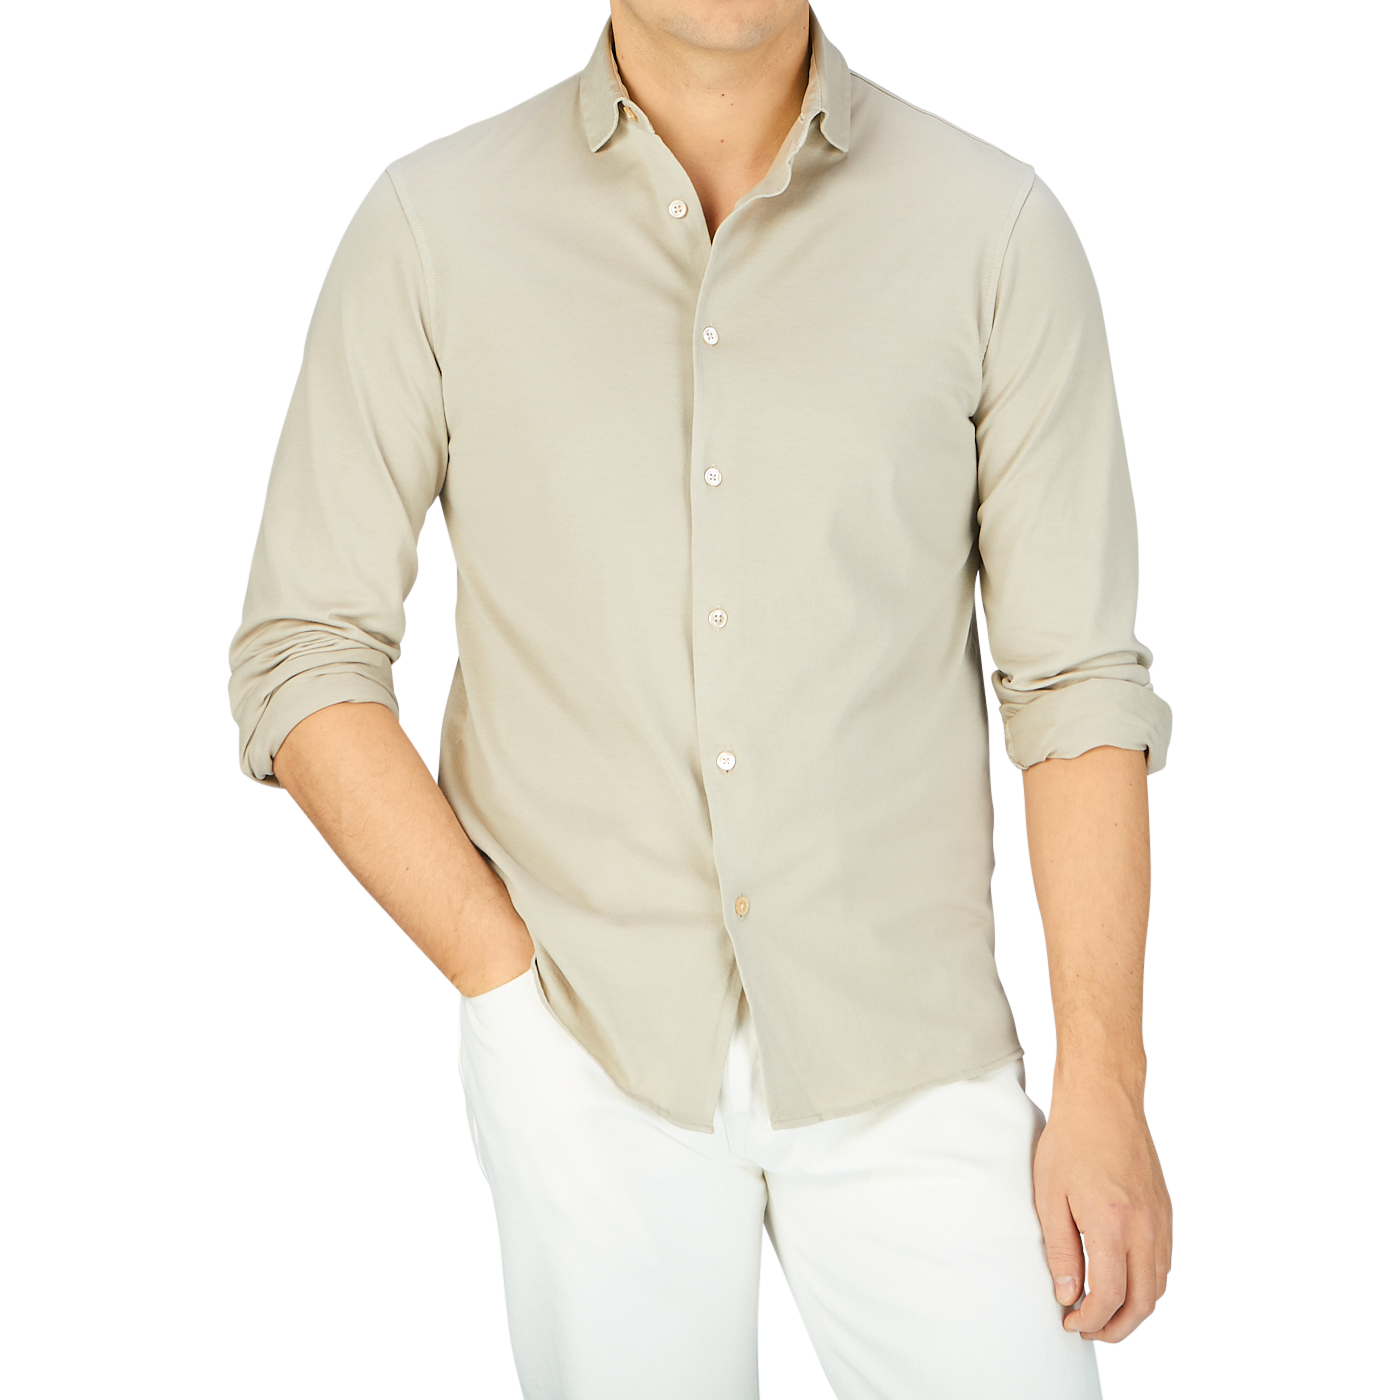 A man wearing a Filippo de Laurentiis Ciottollo Beige Cotton Jersey Knitted Shirt and white pants.